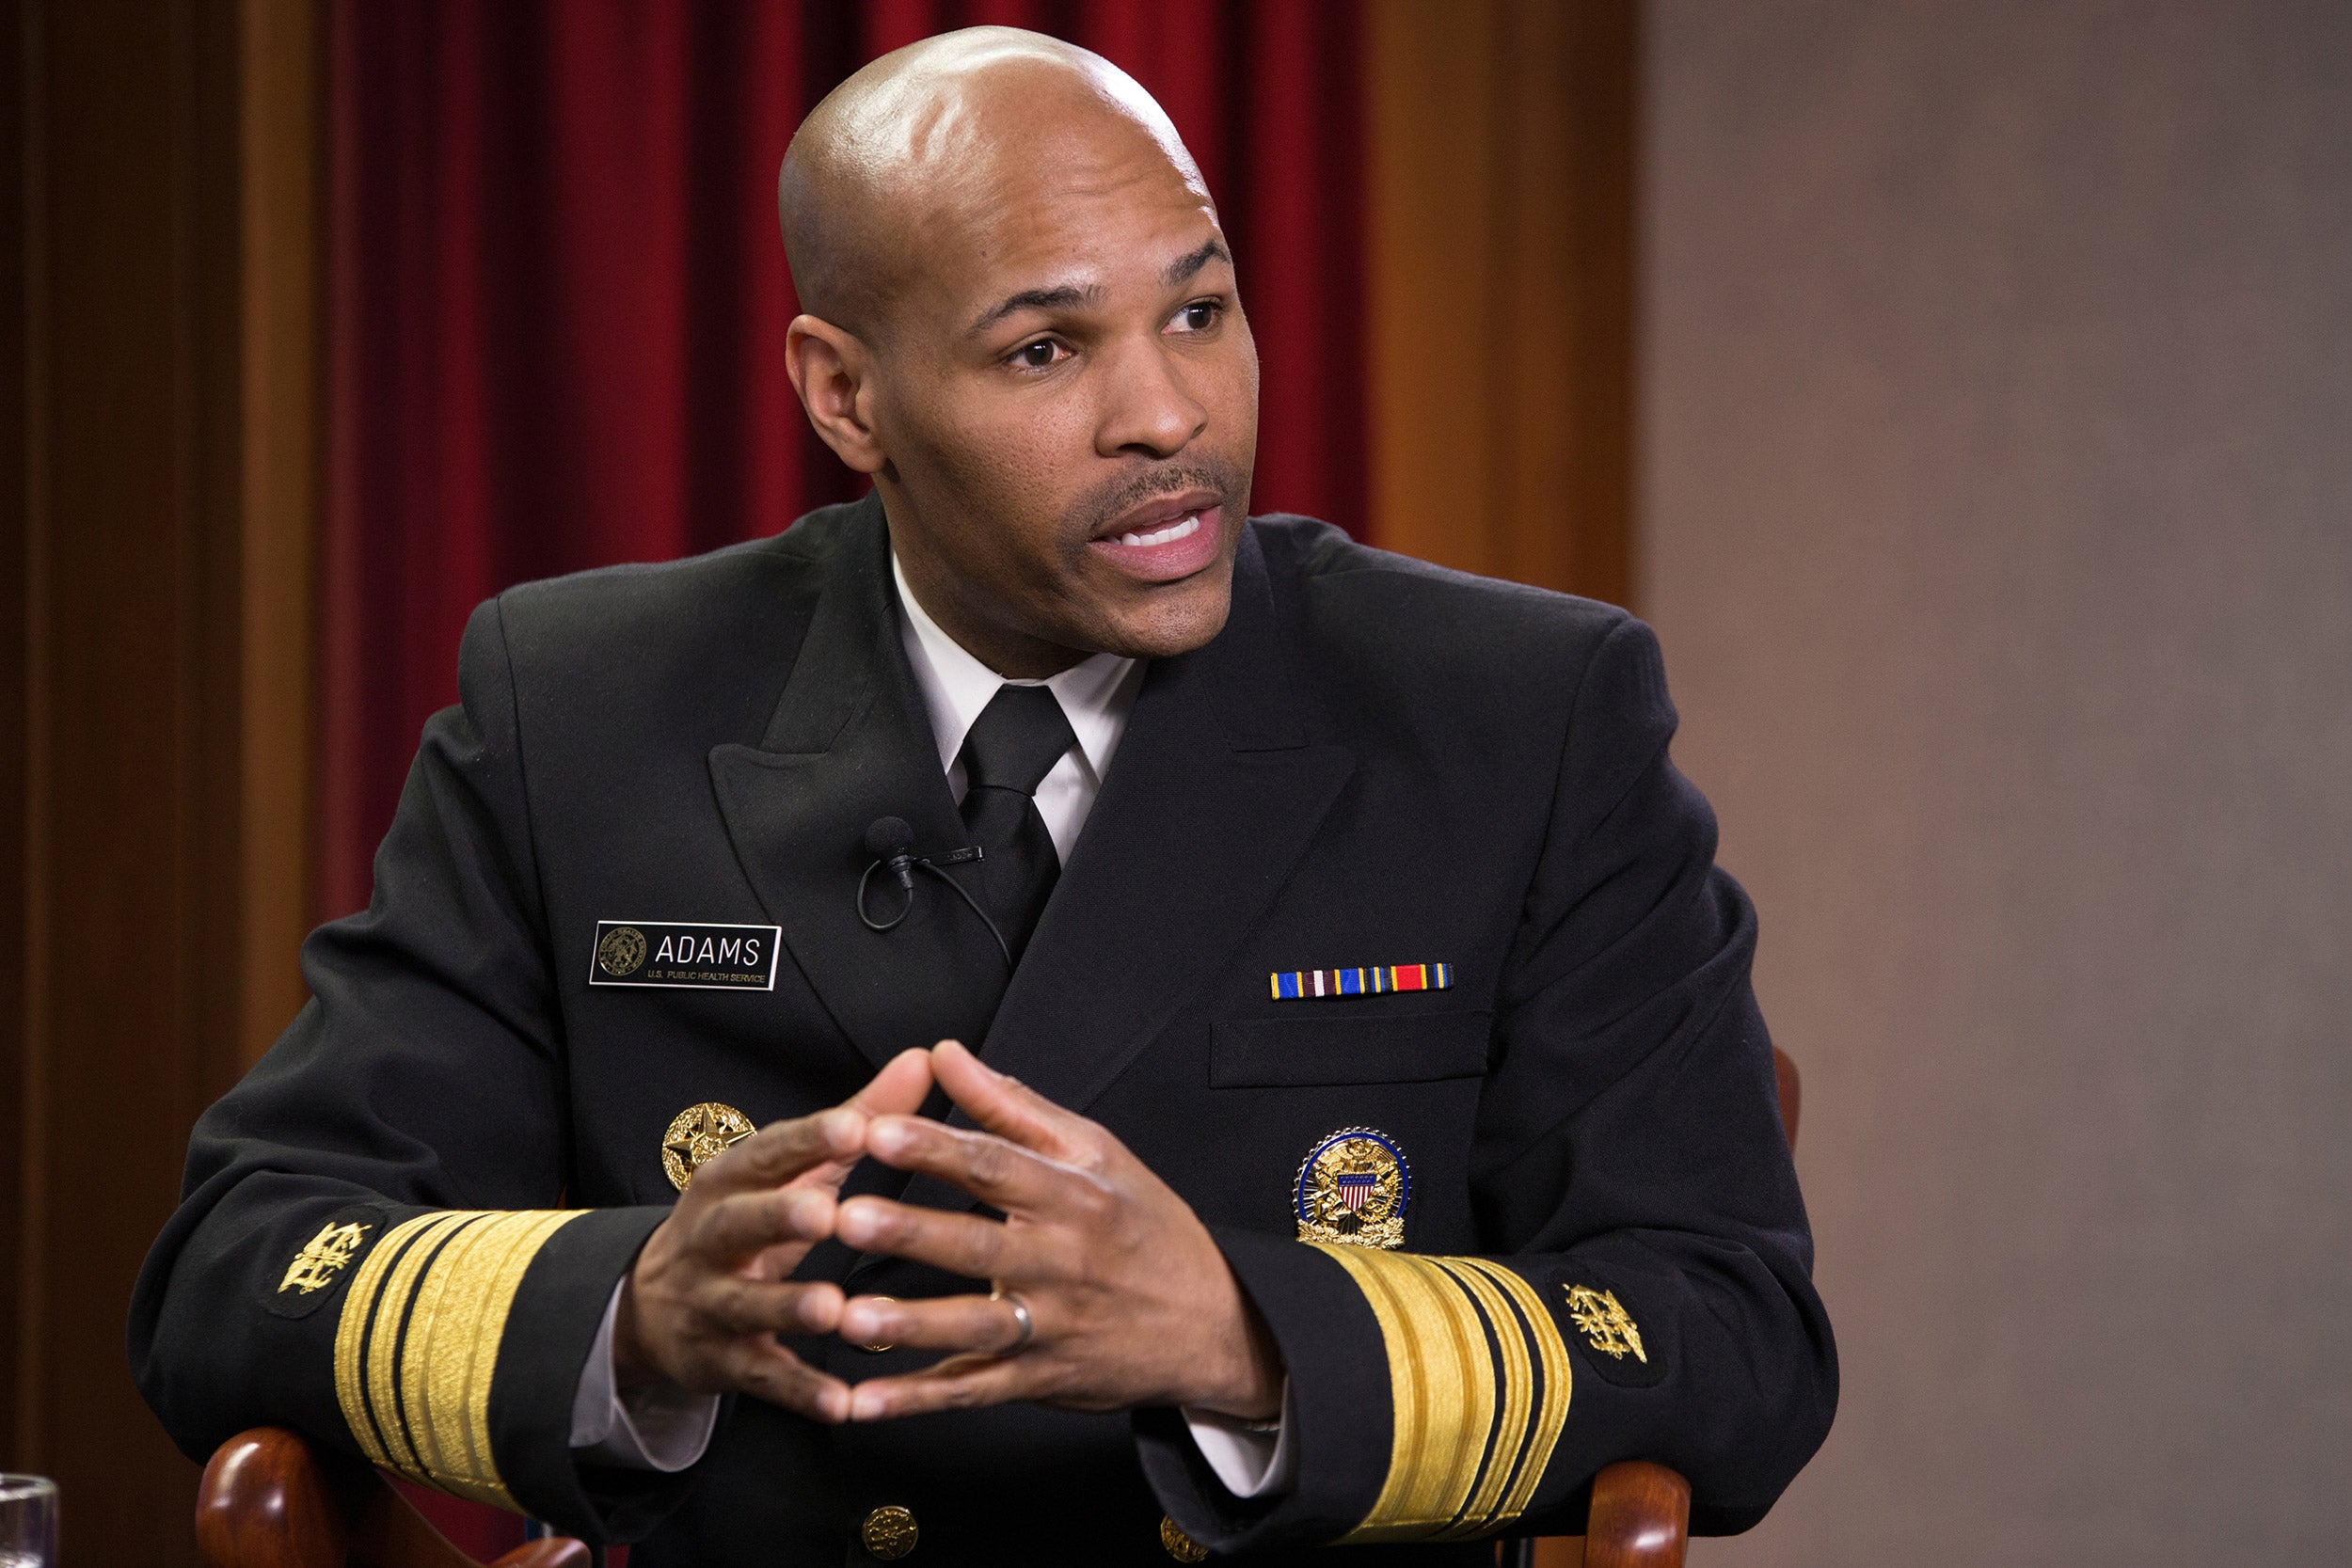 erome Adams, MD, MPH, the 20th Surgeon General of the United States